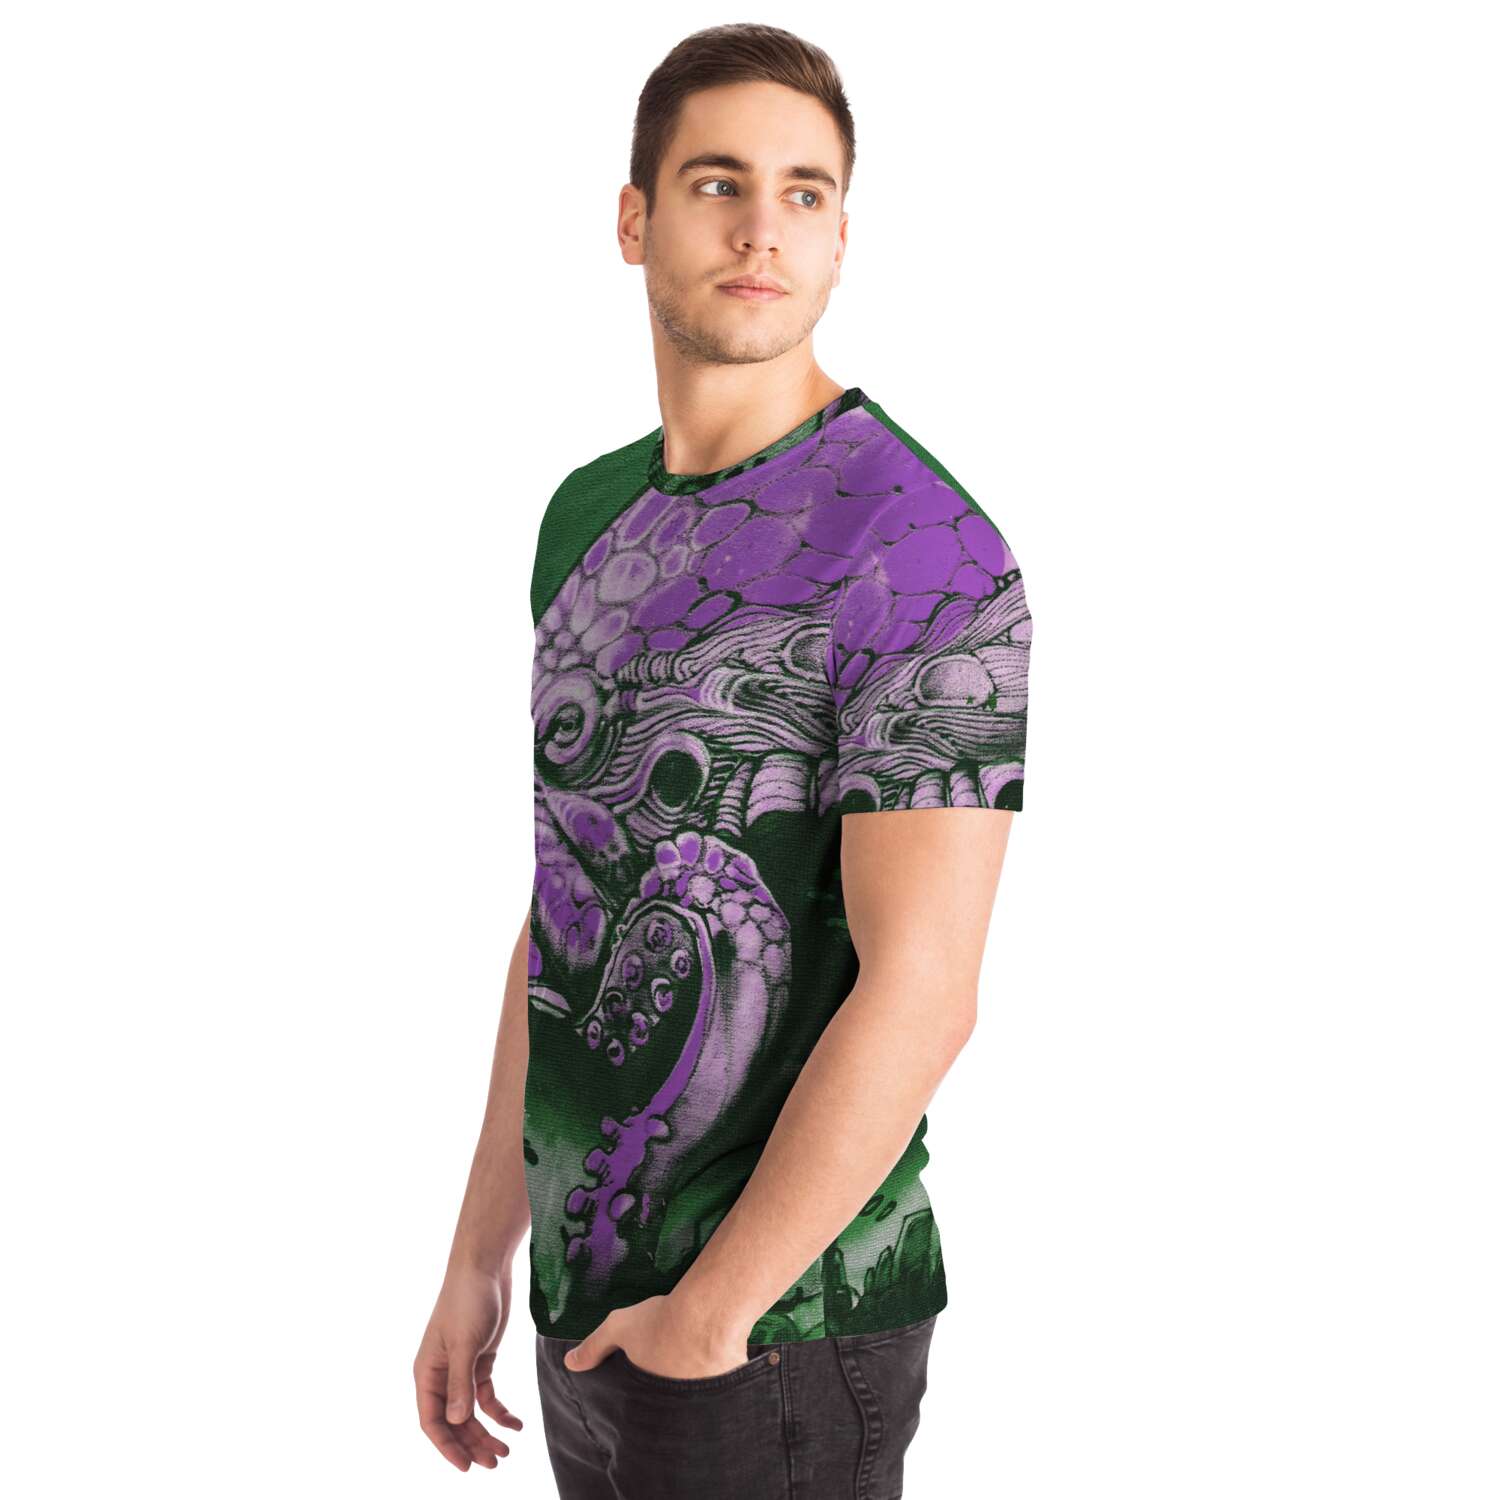 Purple Urban Octopus | Extraterrestrial Octopus | Dystopian Squid All-Over-Print Trippy T-Shirt - Sacred Surreal